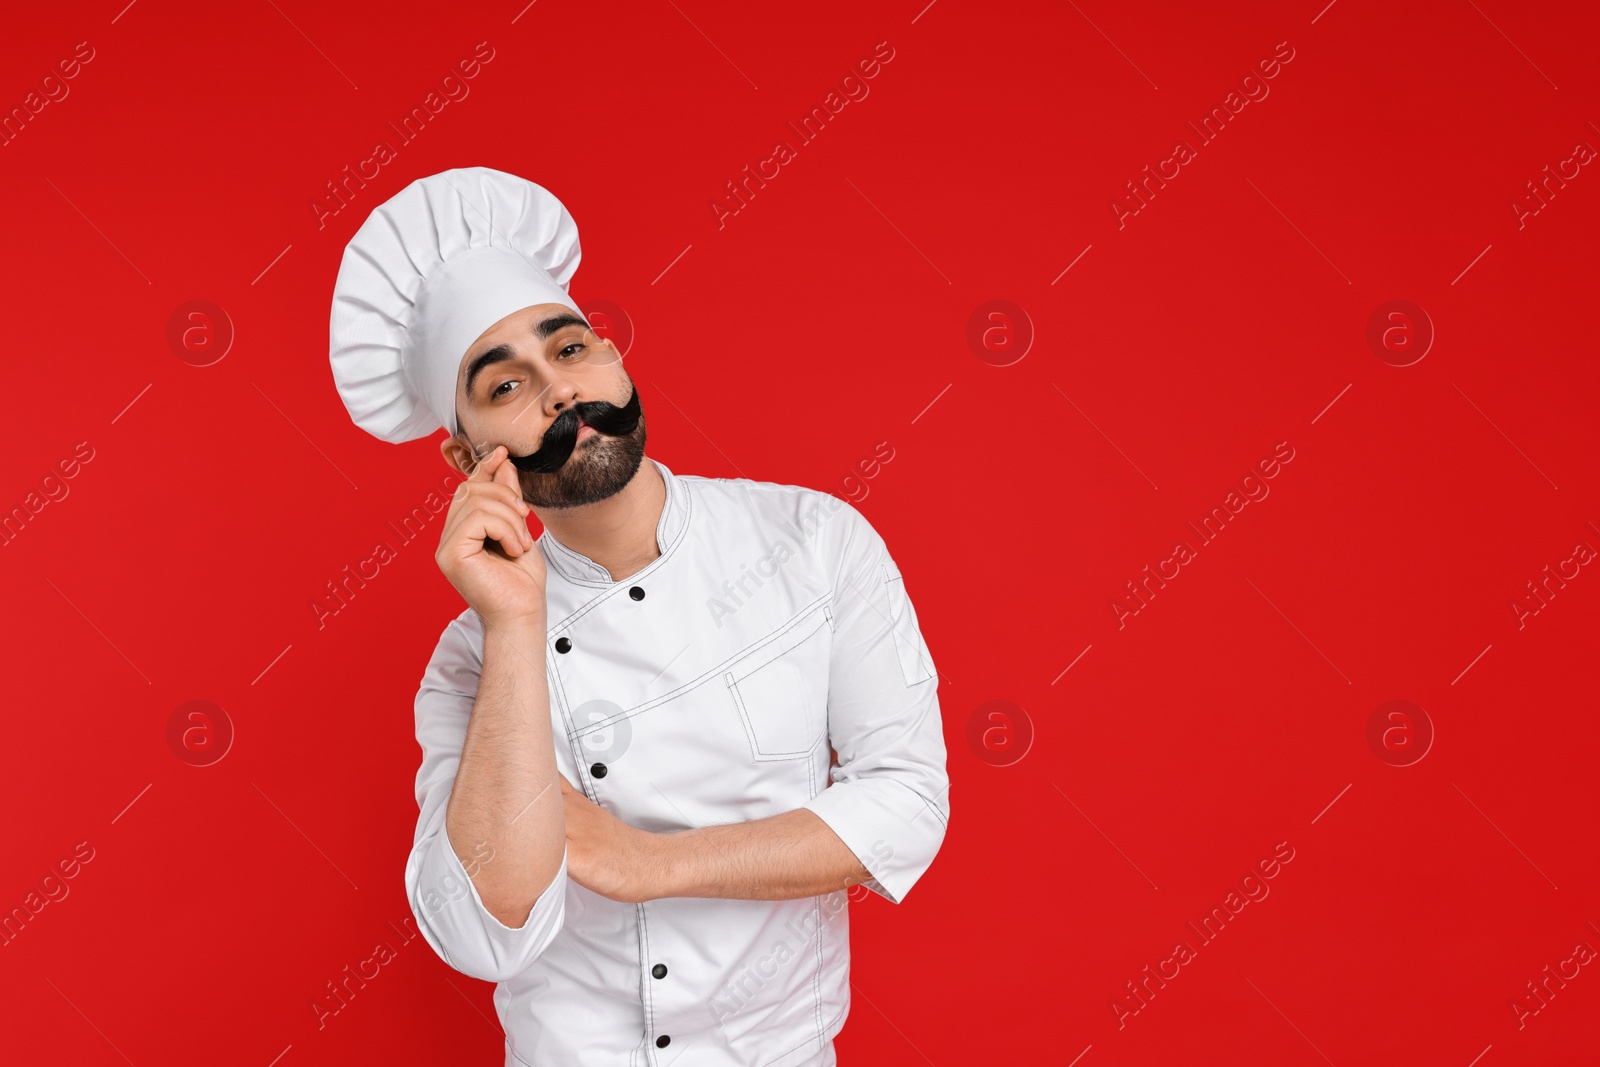 Photo of Professional chef with funny artificial moustache on red background. Space for text